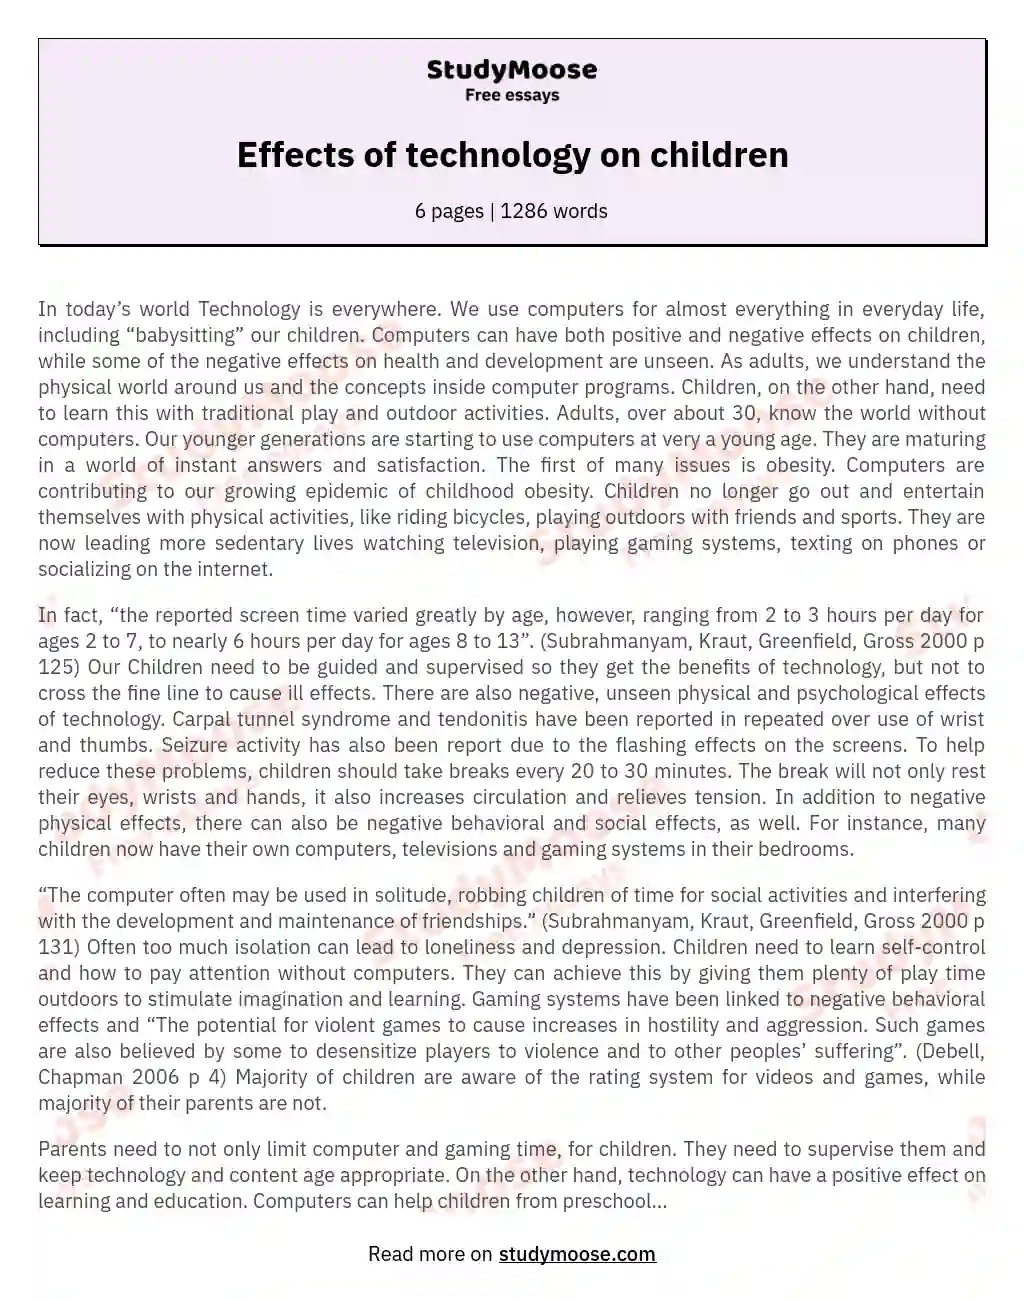 Effects of technology on children essay